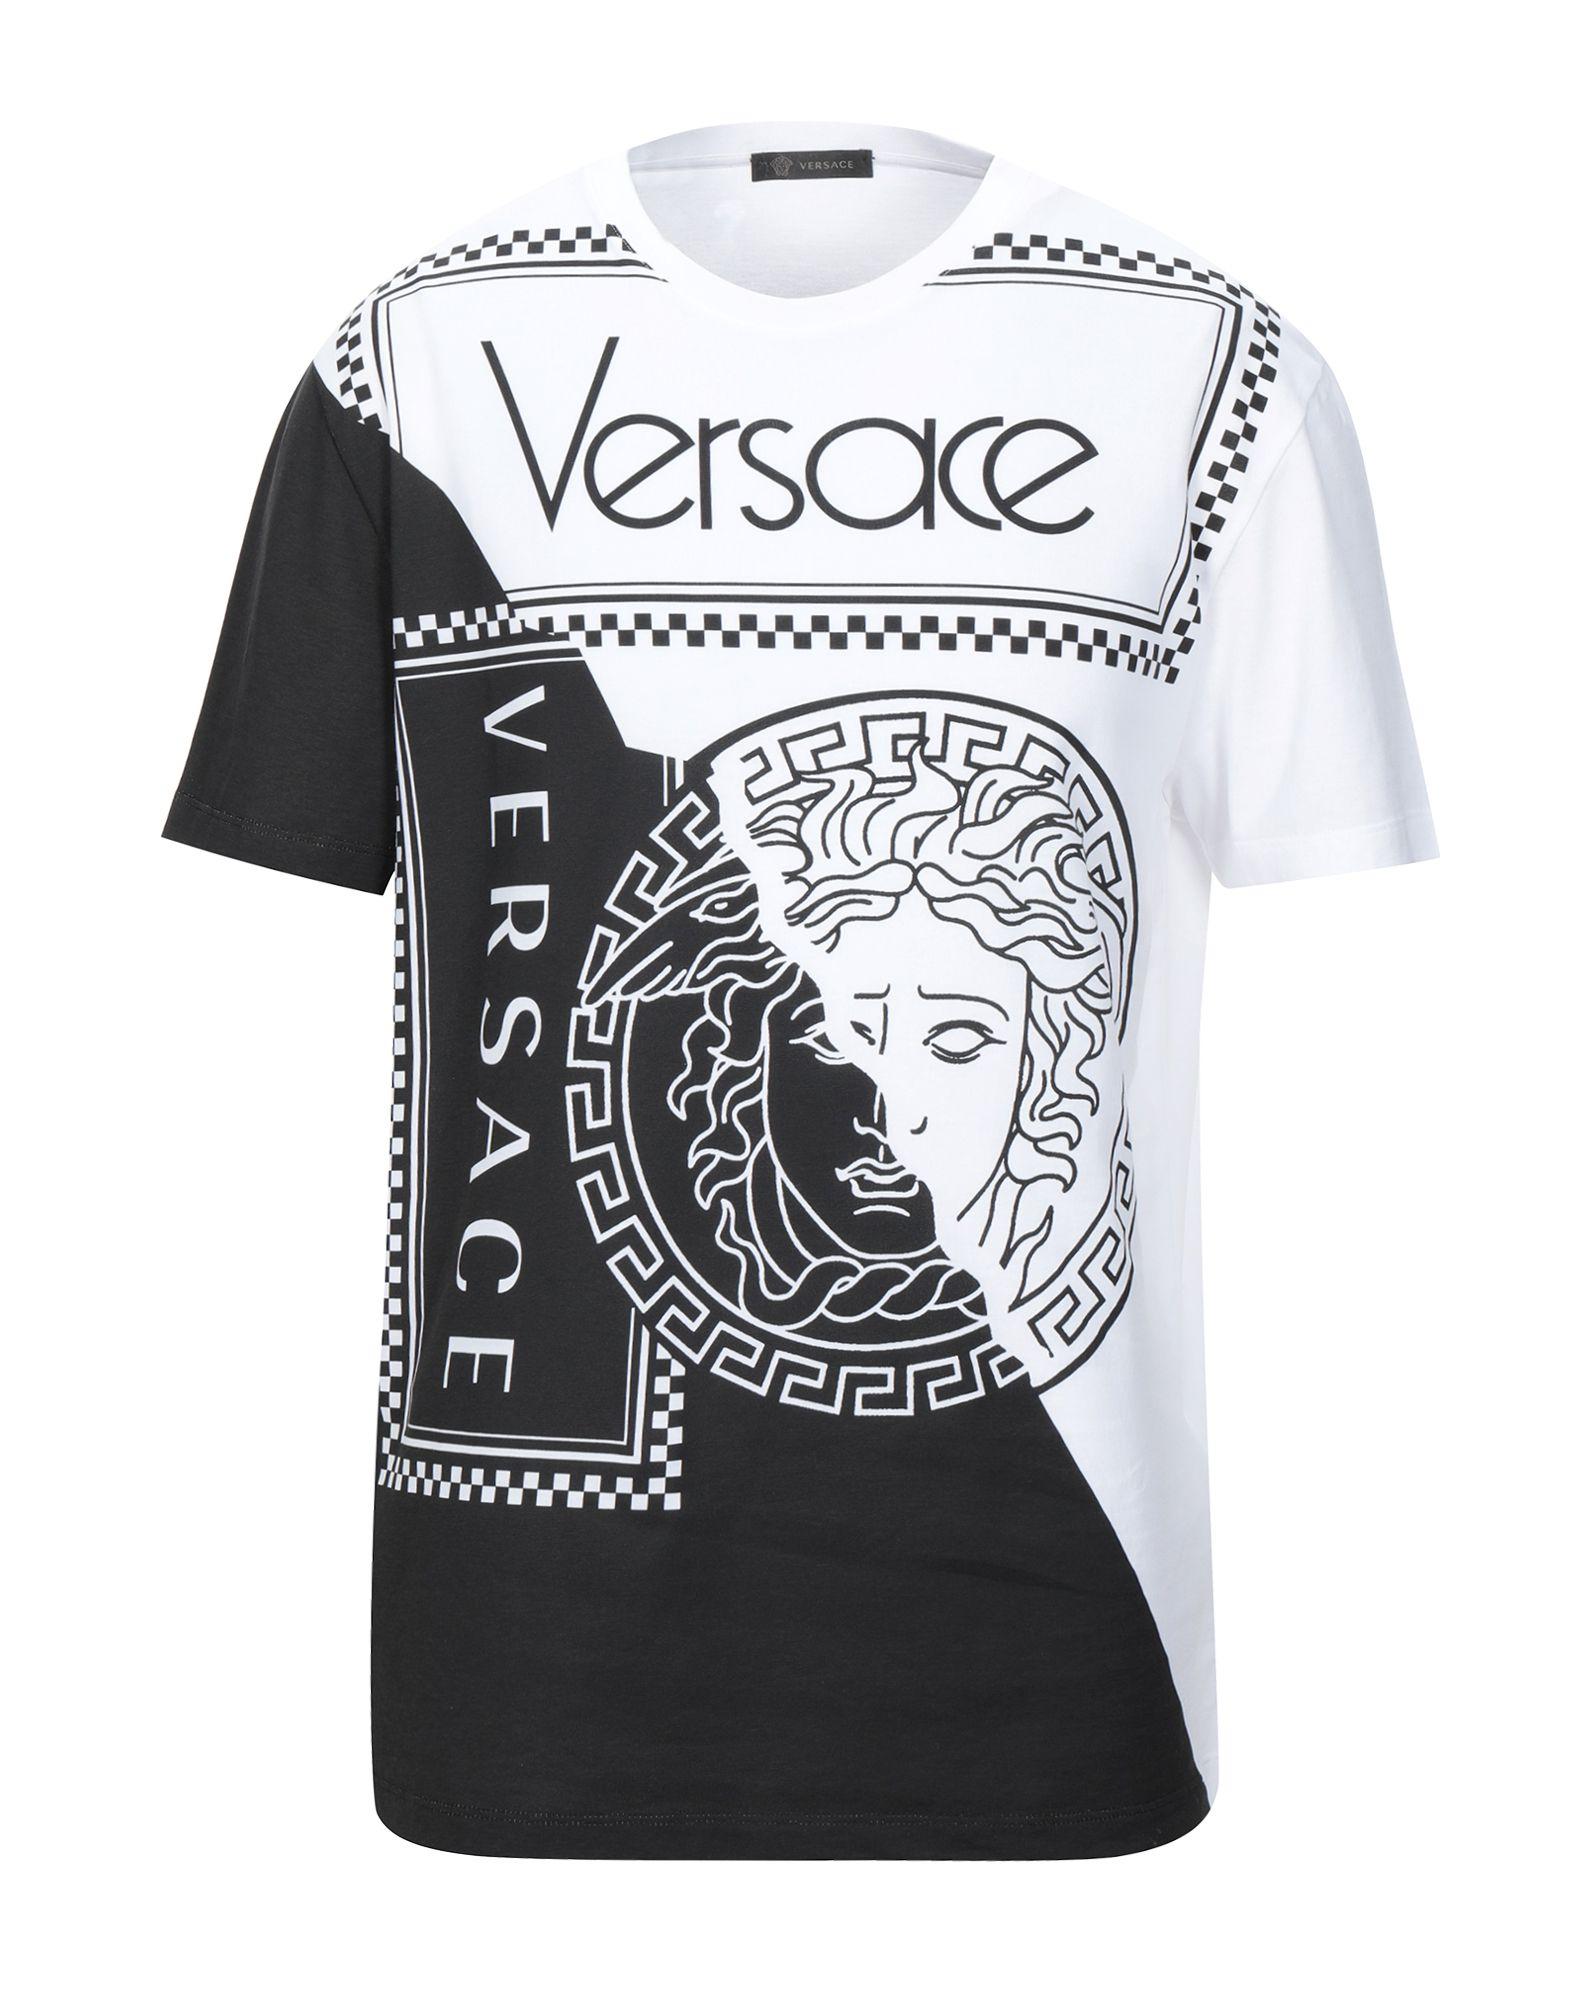 Versace Shirt Black And White Factory Sale, SAVE 41% - www.colexio-karbo.com